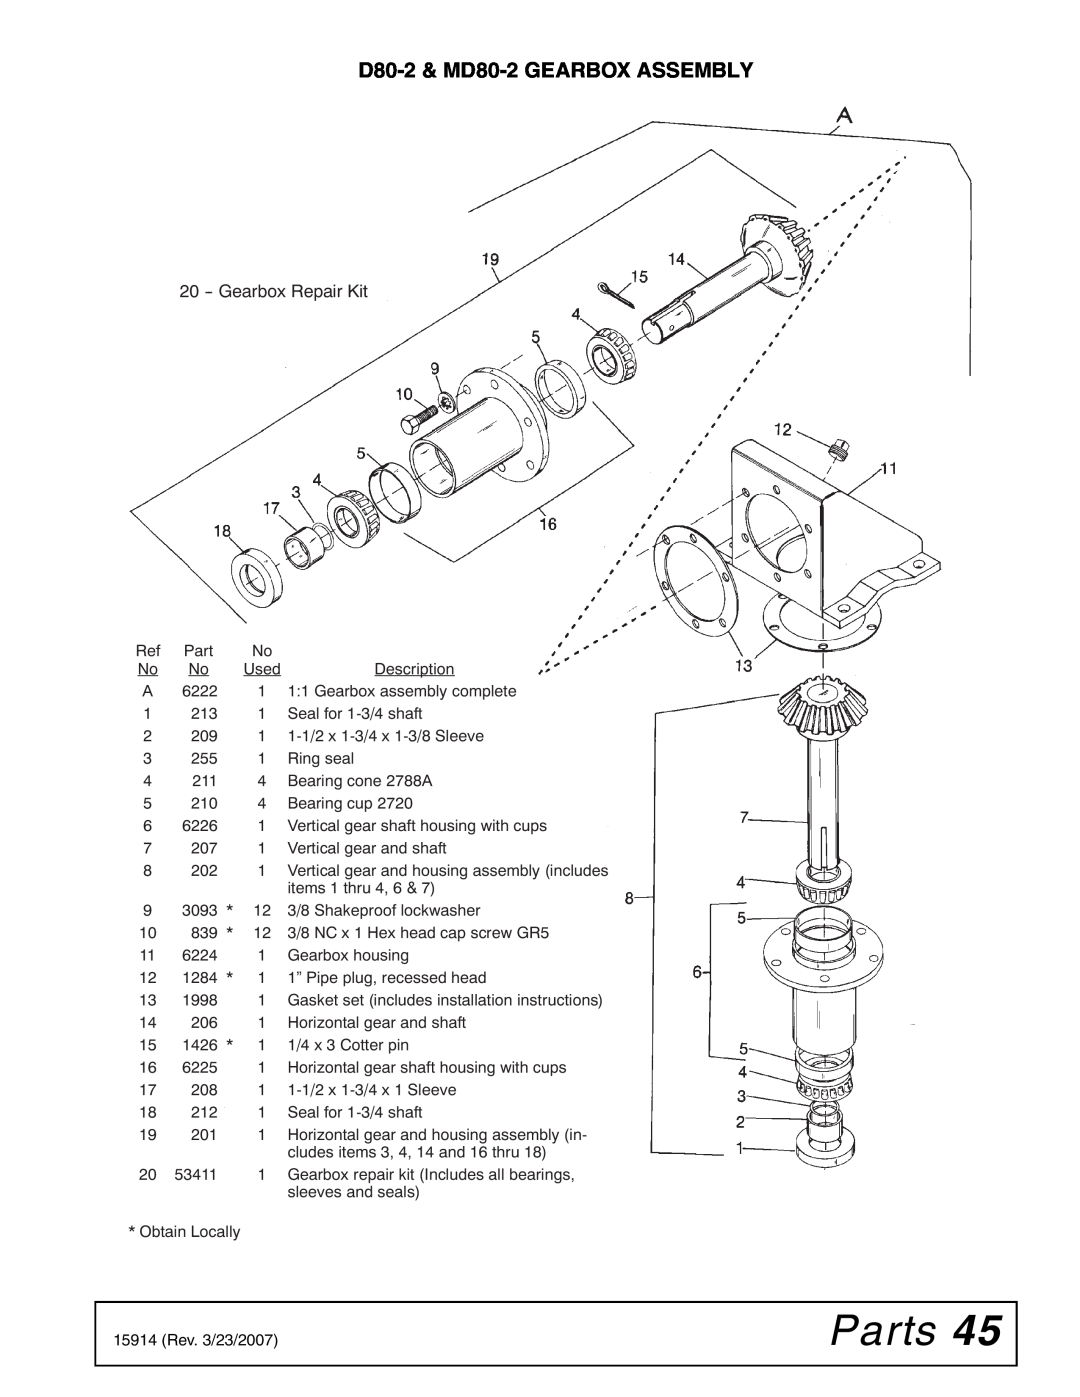 Woods Equipment manual Parts, D80-2& MD80-2GEARBOX ASSEMBLY, Gearbox Repair Kit 